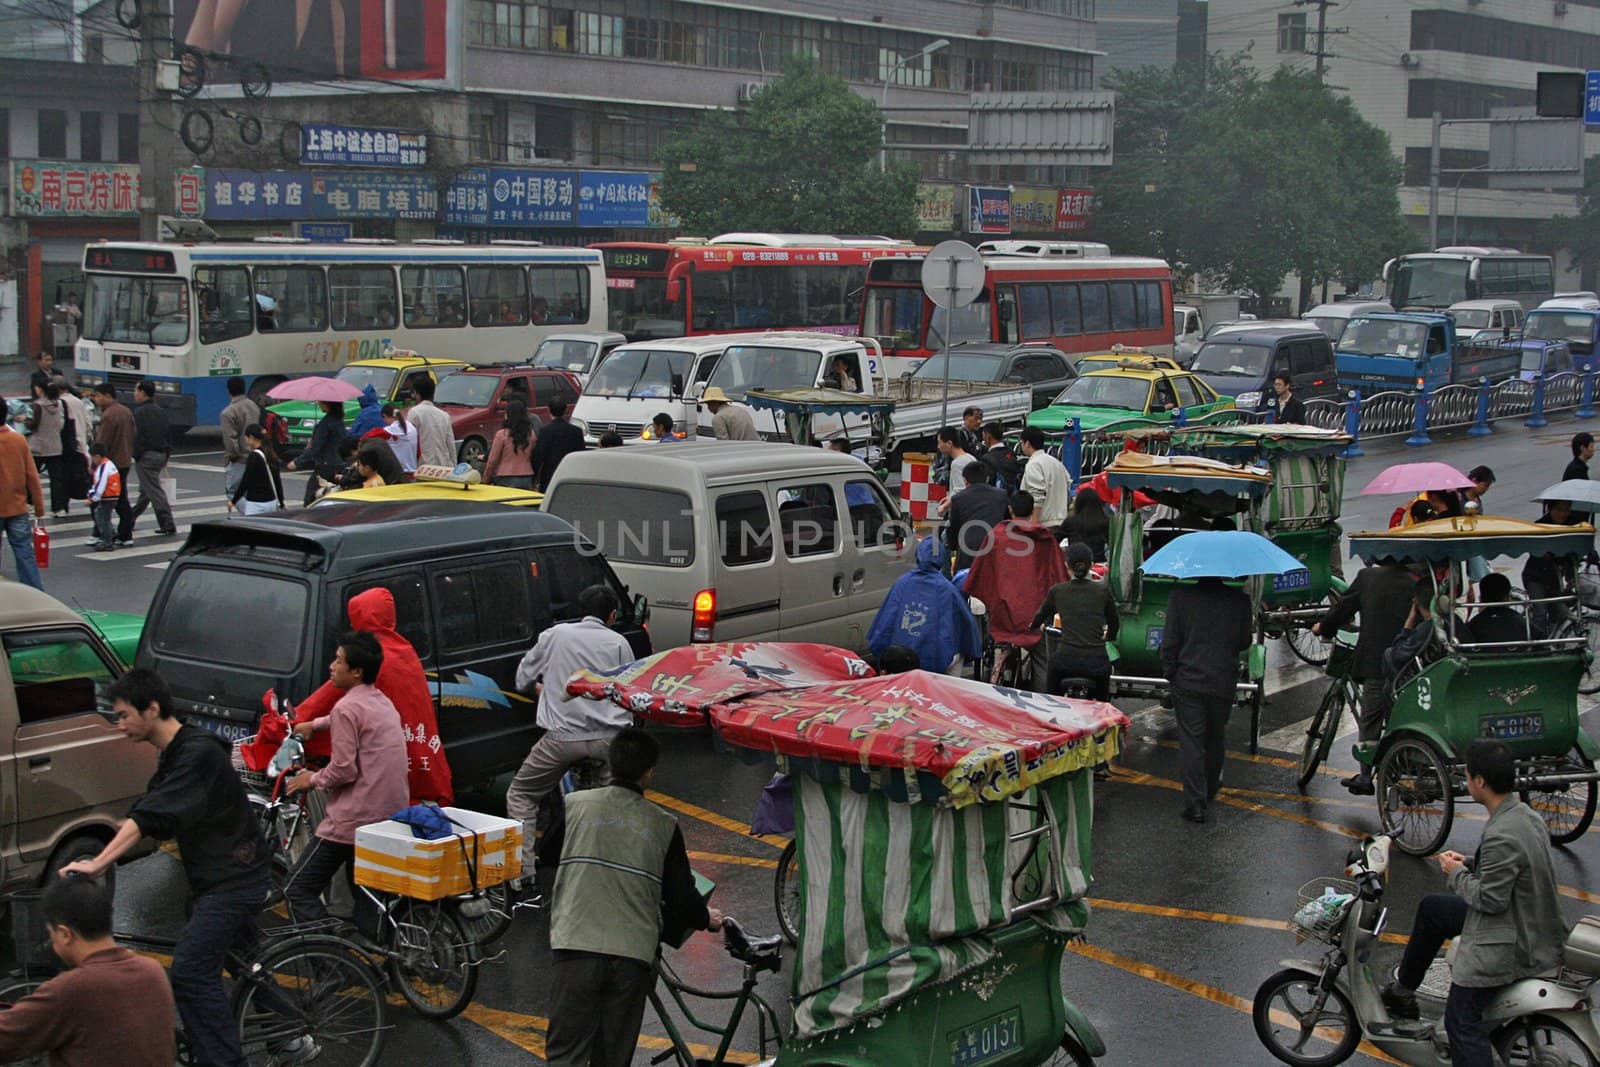 CHENGDU, CHINA - SEPTEMBER 23: View on the traffic jam in rainy day on September 23, 2006 in Chengdu, Sichuan, China